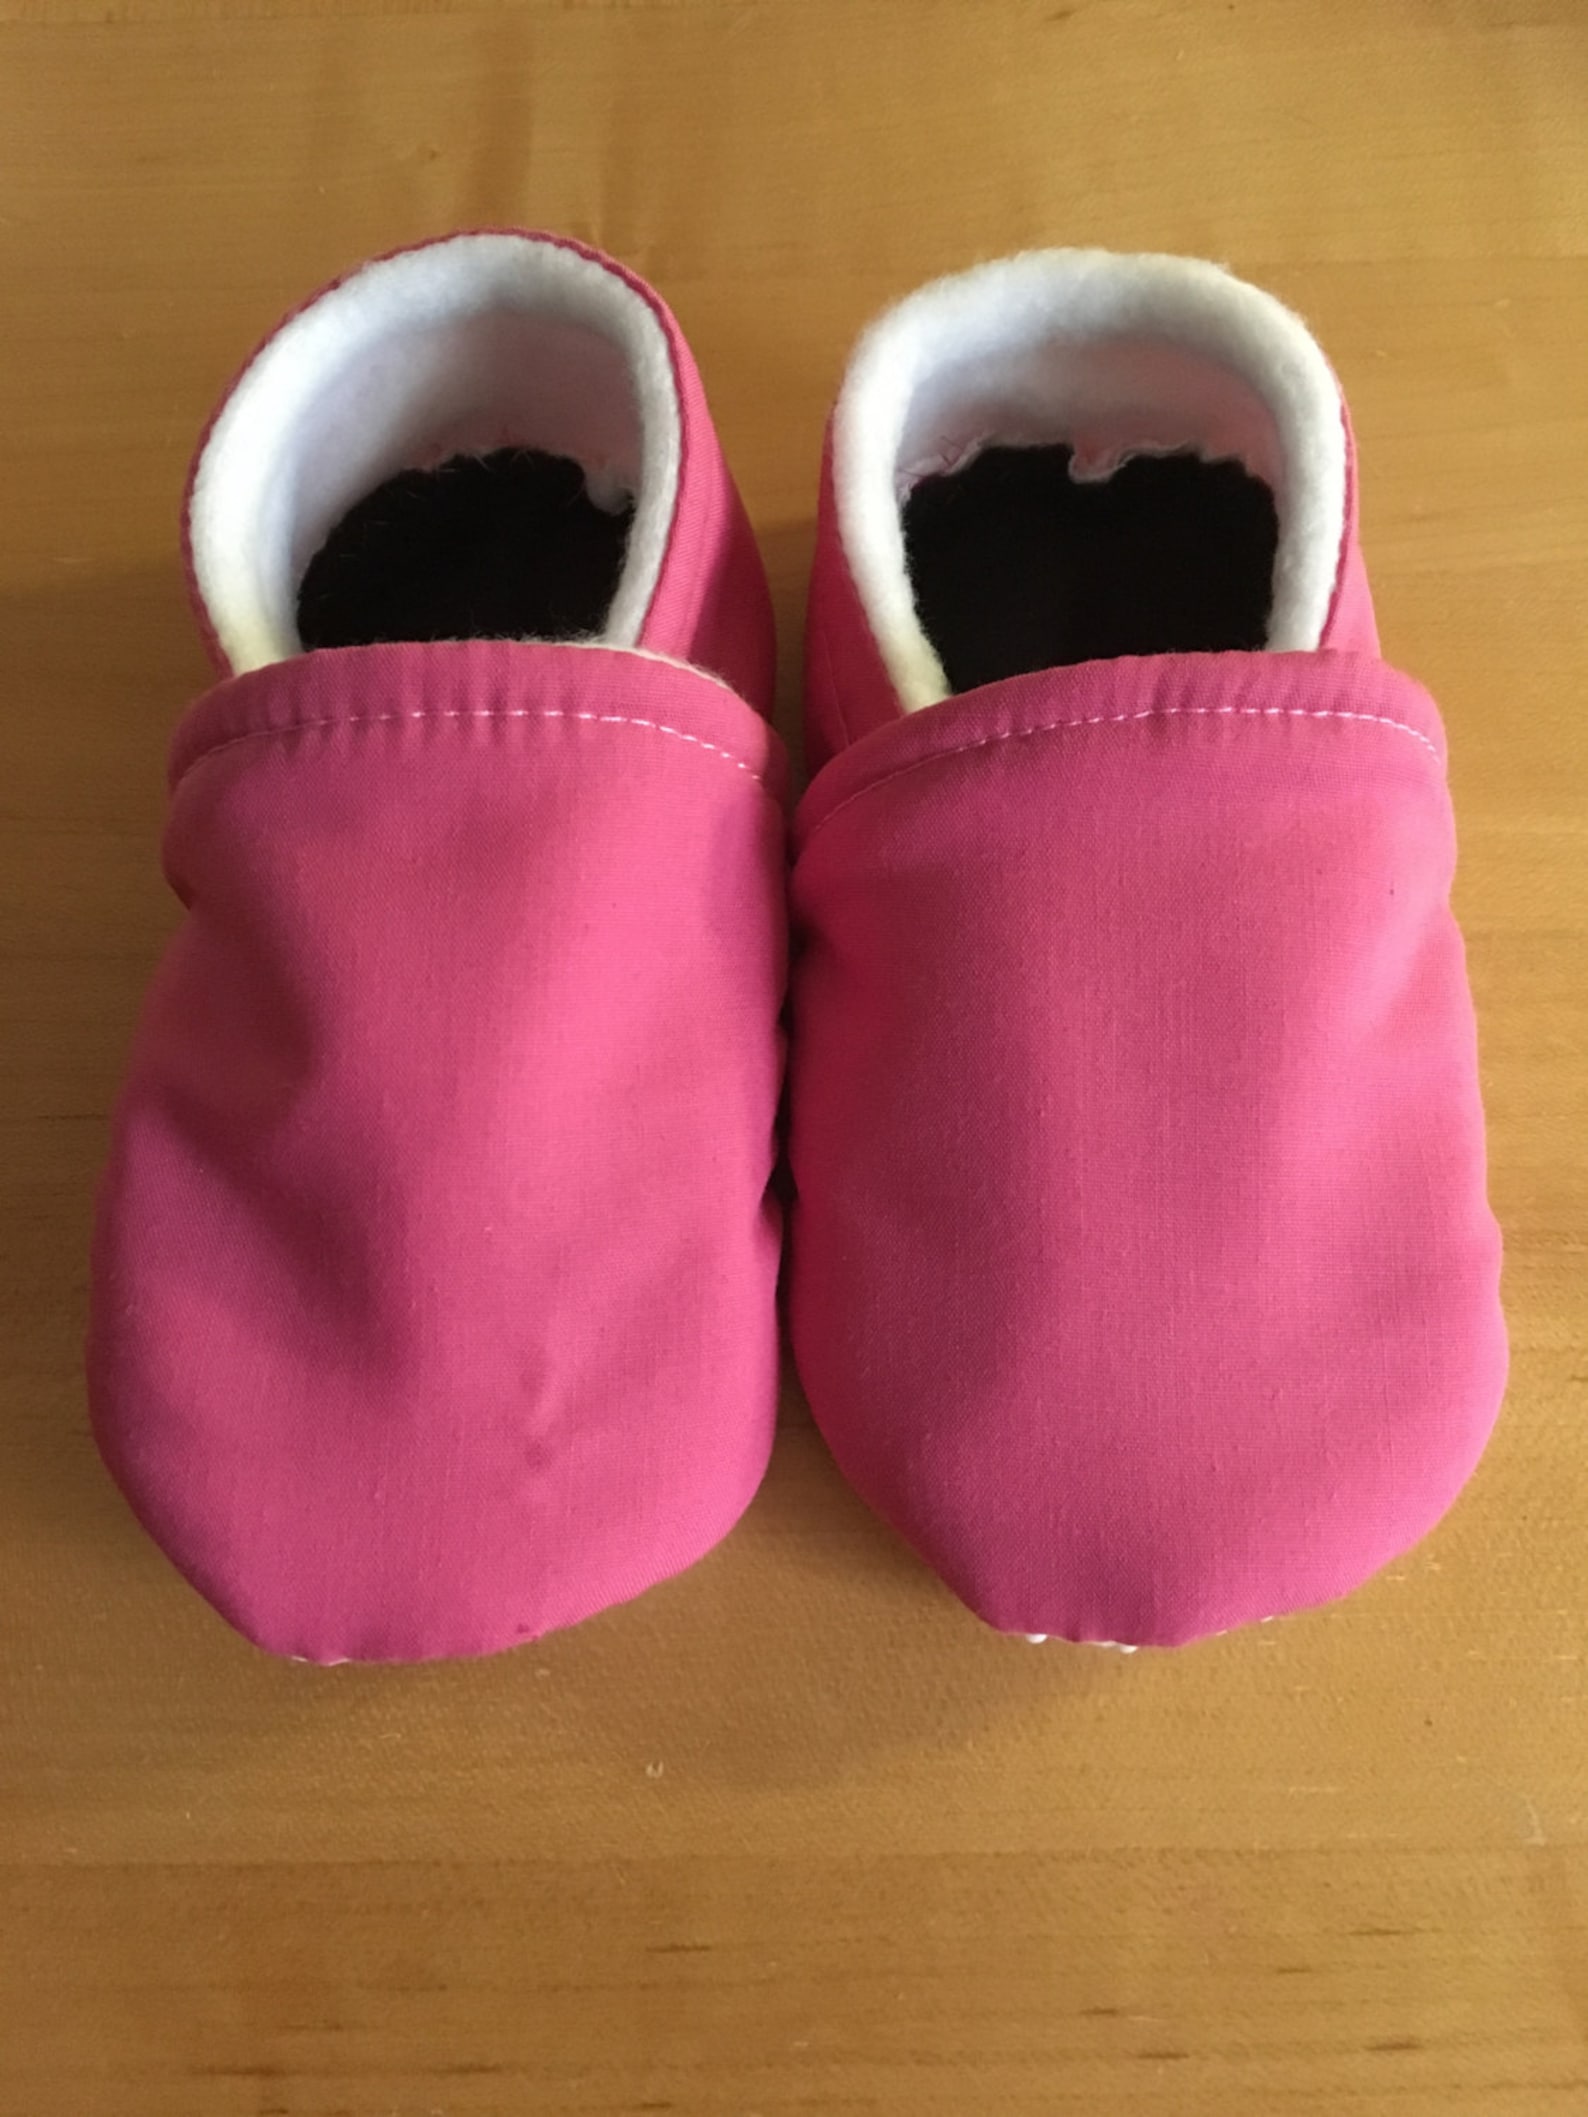 EXTRA WIDE Baby Shoes Shoes for Chubby Feet Baby wide | Etsy